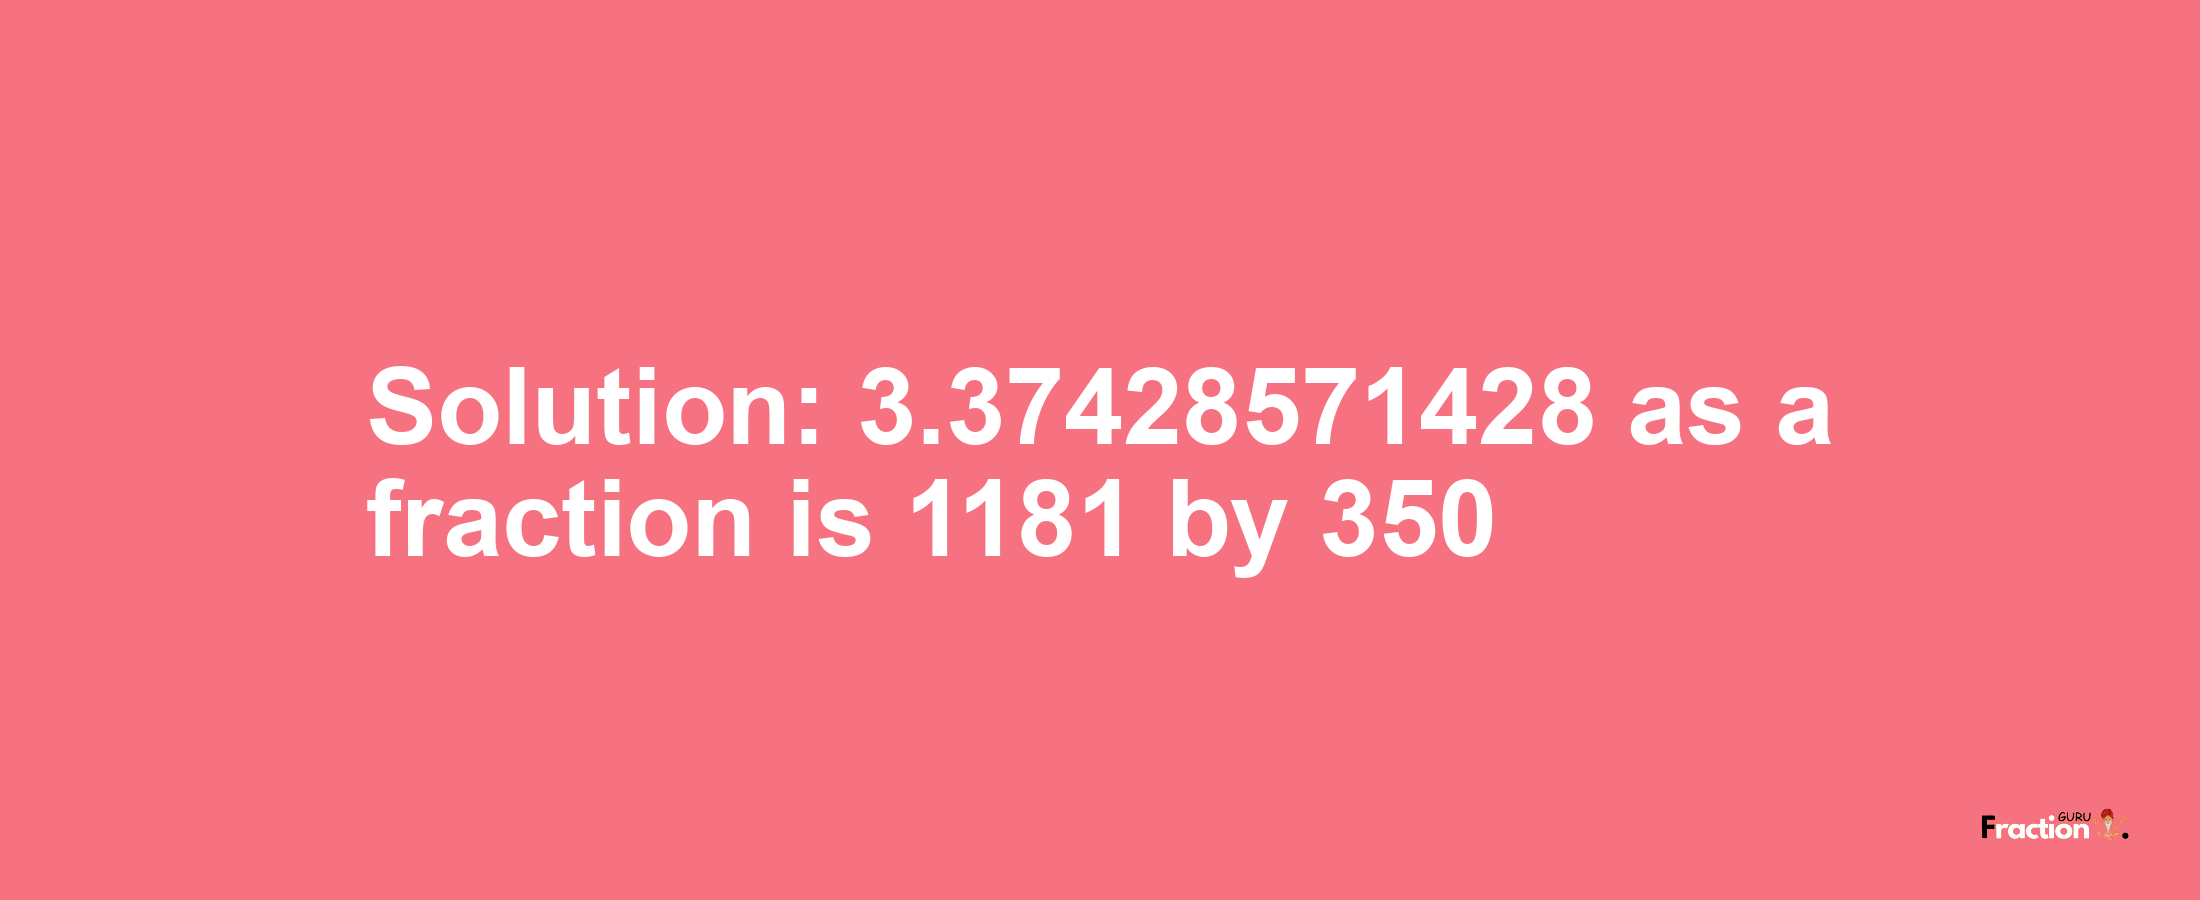 Solution:3.37428571428 as a fraction is 1181/350